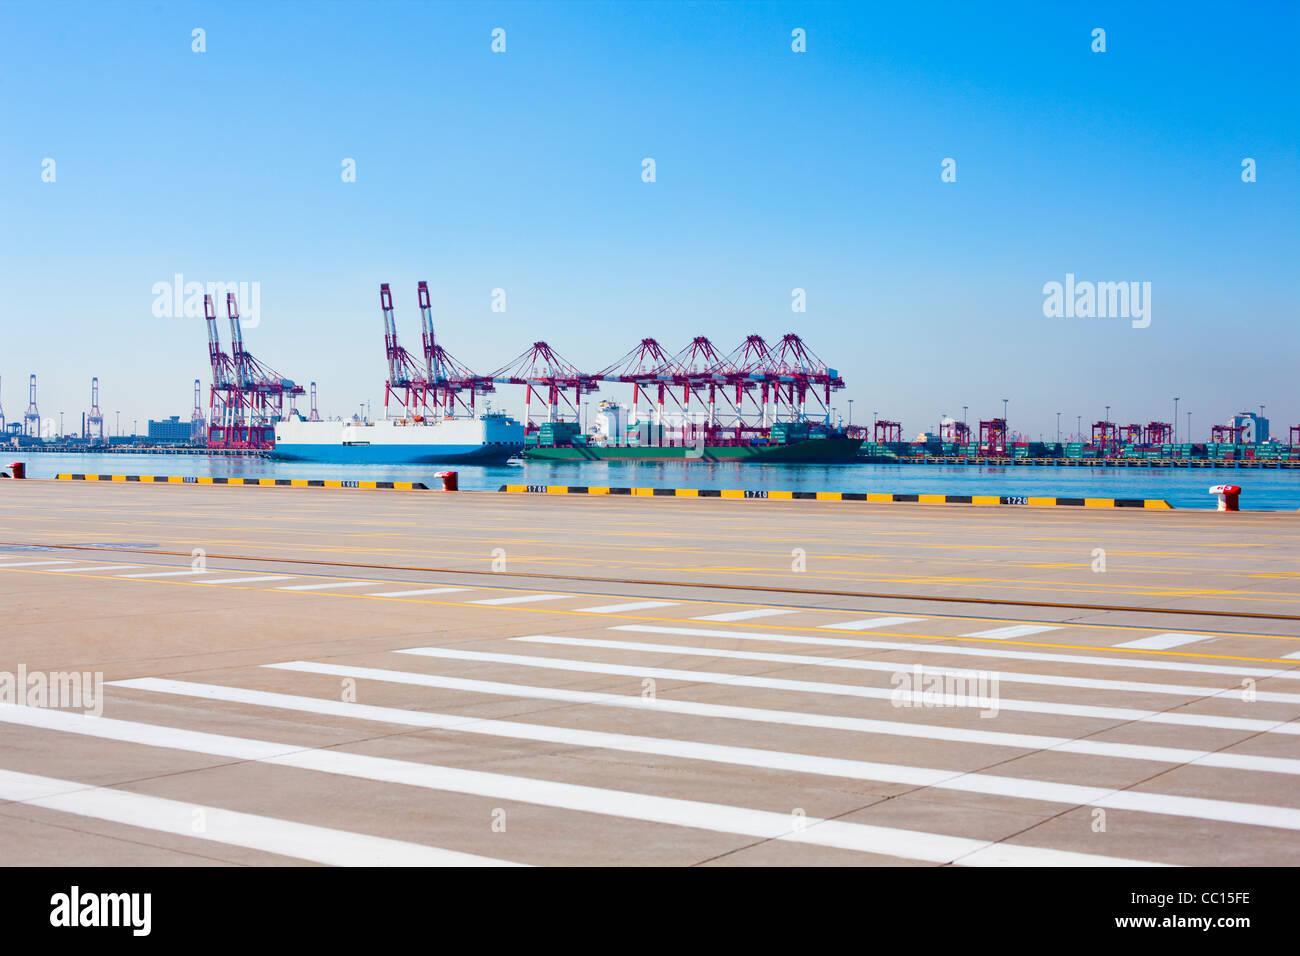 Cranes and cargo ships on the shipping dock Stock Photo